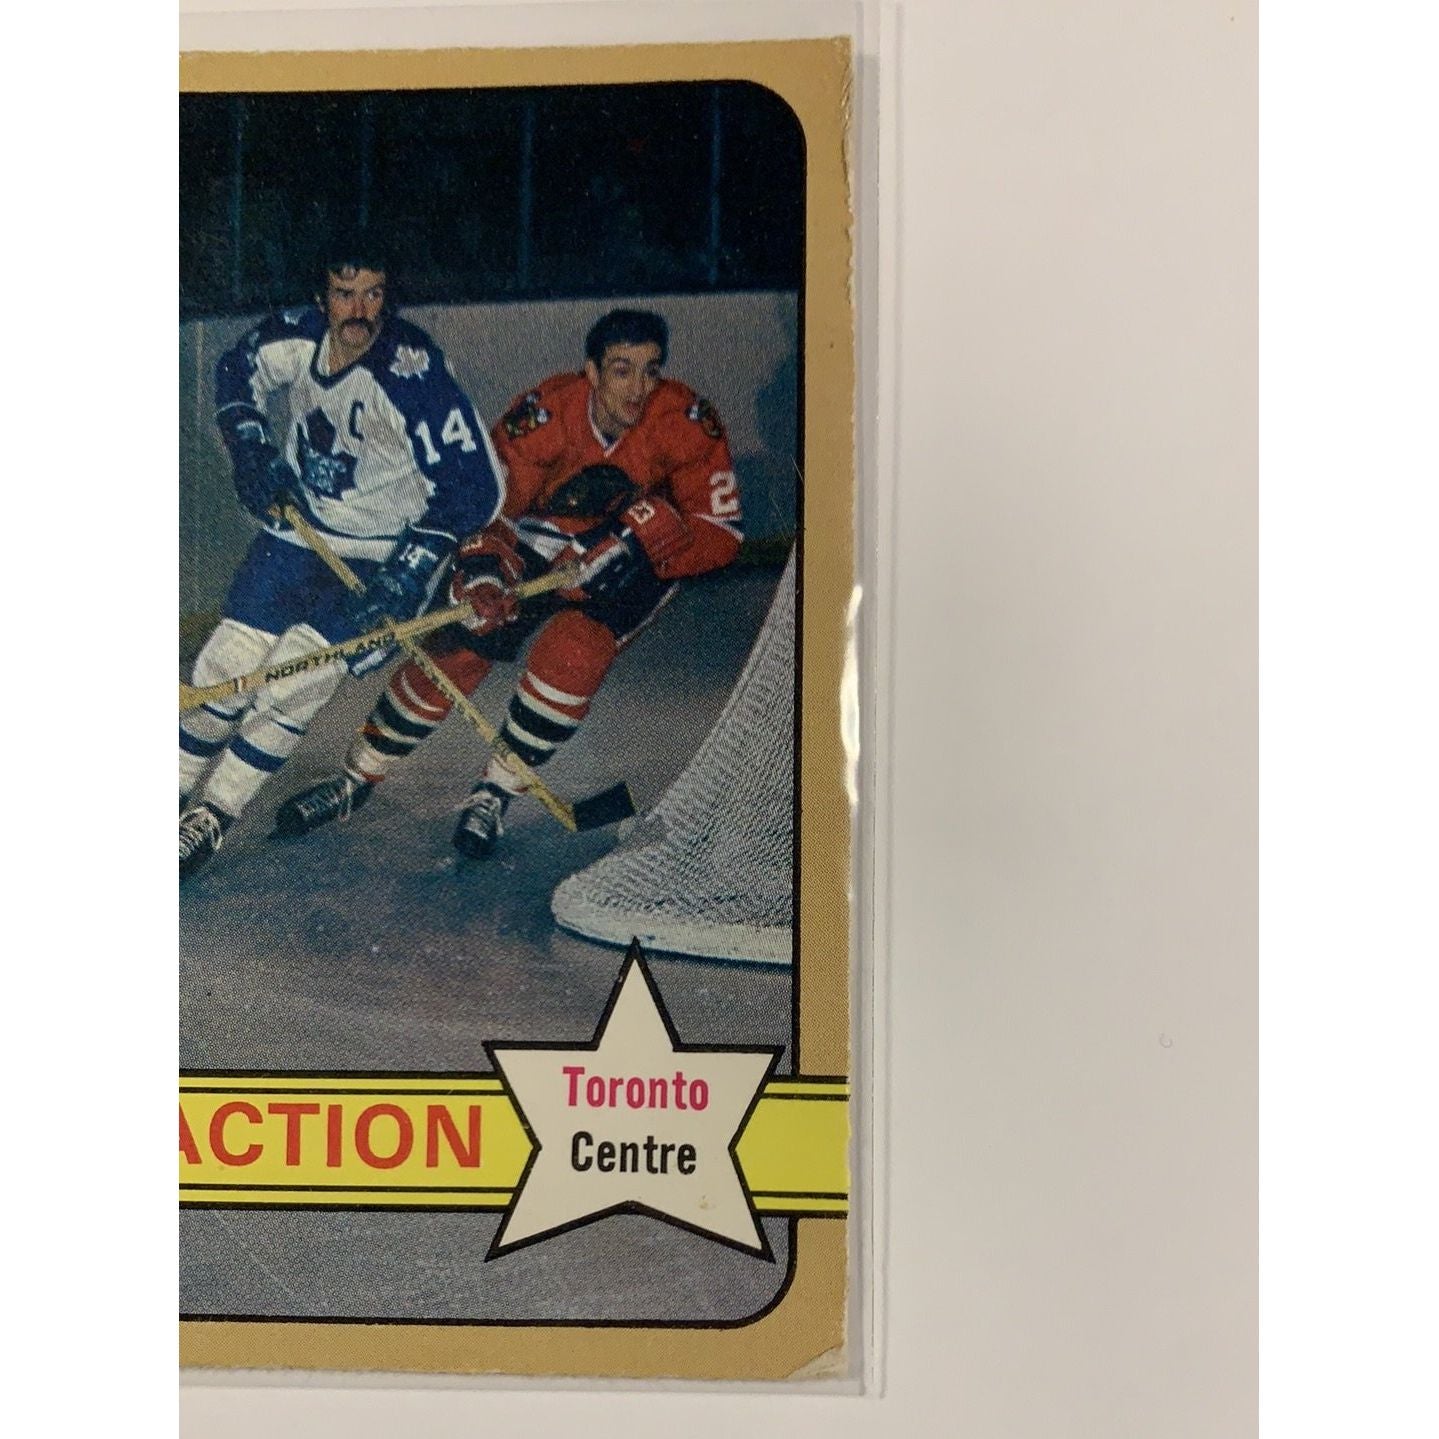  1972-73 O-Pee-Chee NHL Action Toronto Centre Dave Keon  Local Legends Cards & Collectibles